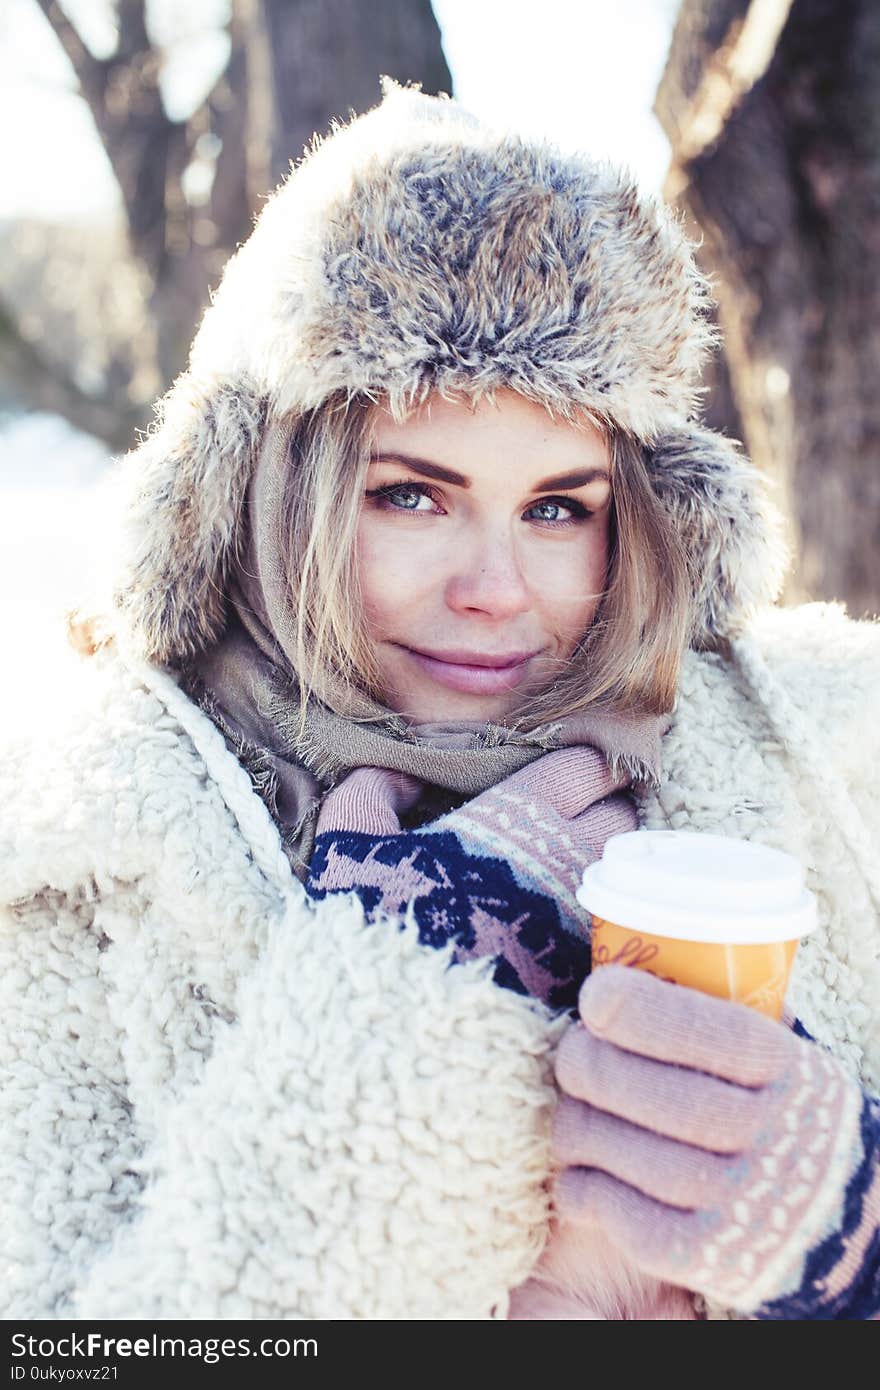 Young pretty teenage hipster girl outdoor in winter snow park having fun drinking coffee, warming up happy smiling, lifestyle people concept close up